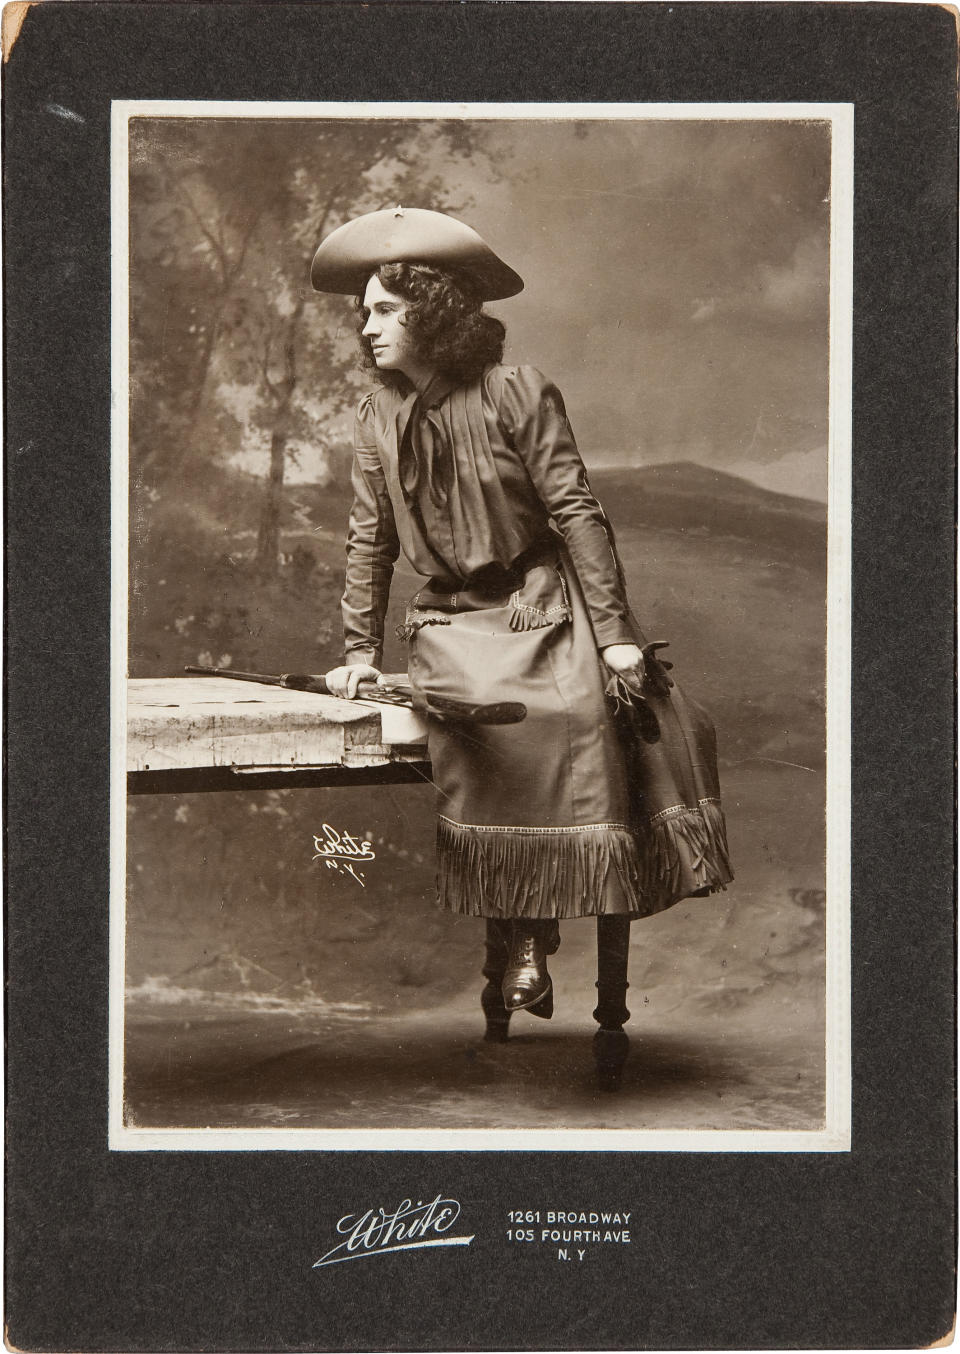 In this handout photo, provided by Heritage Auctions, Annie Oakley is seen as The Western Girl in a Cabinet Photo, signed and inscribed on verso. This is one of a series of photographs taken in 1902 or 1903 in New York. Relatives of Oakley are selling items that once belonged to the legendary sharpshooter including a Stetson hat, guns, letters and photographs. Heritage Auctions will offer up about 100 items related to Oakley on Sunday in Dallas.(AP Photo/Courtesy of Heritage Auctions)